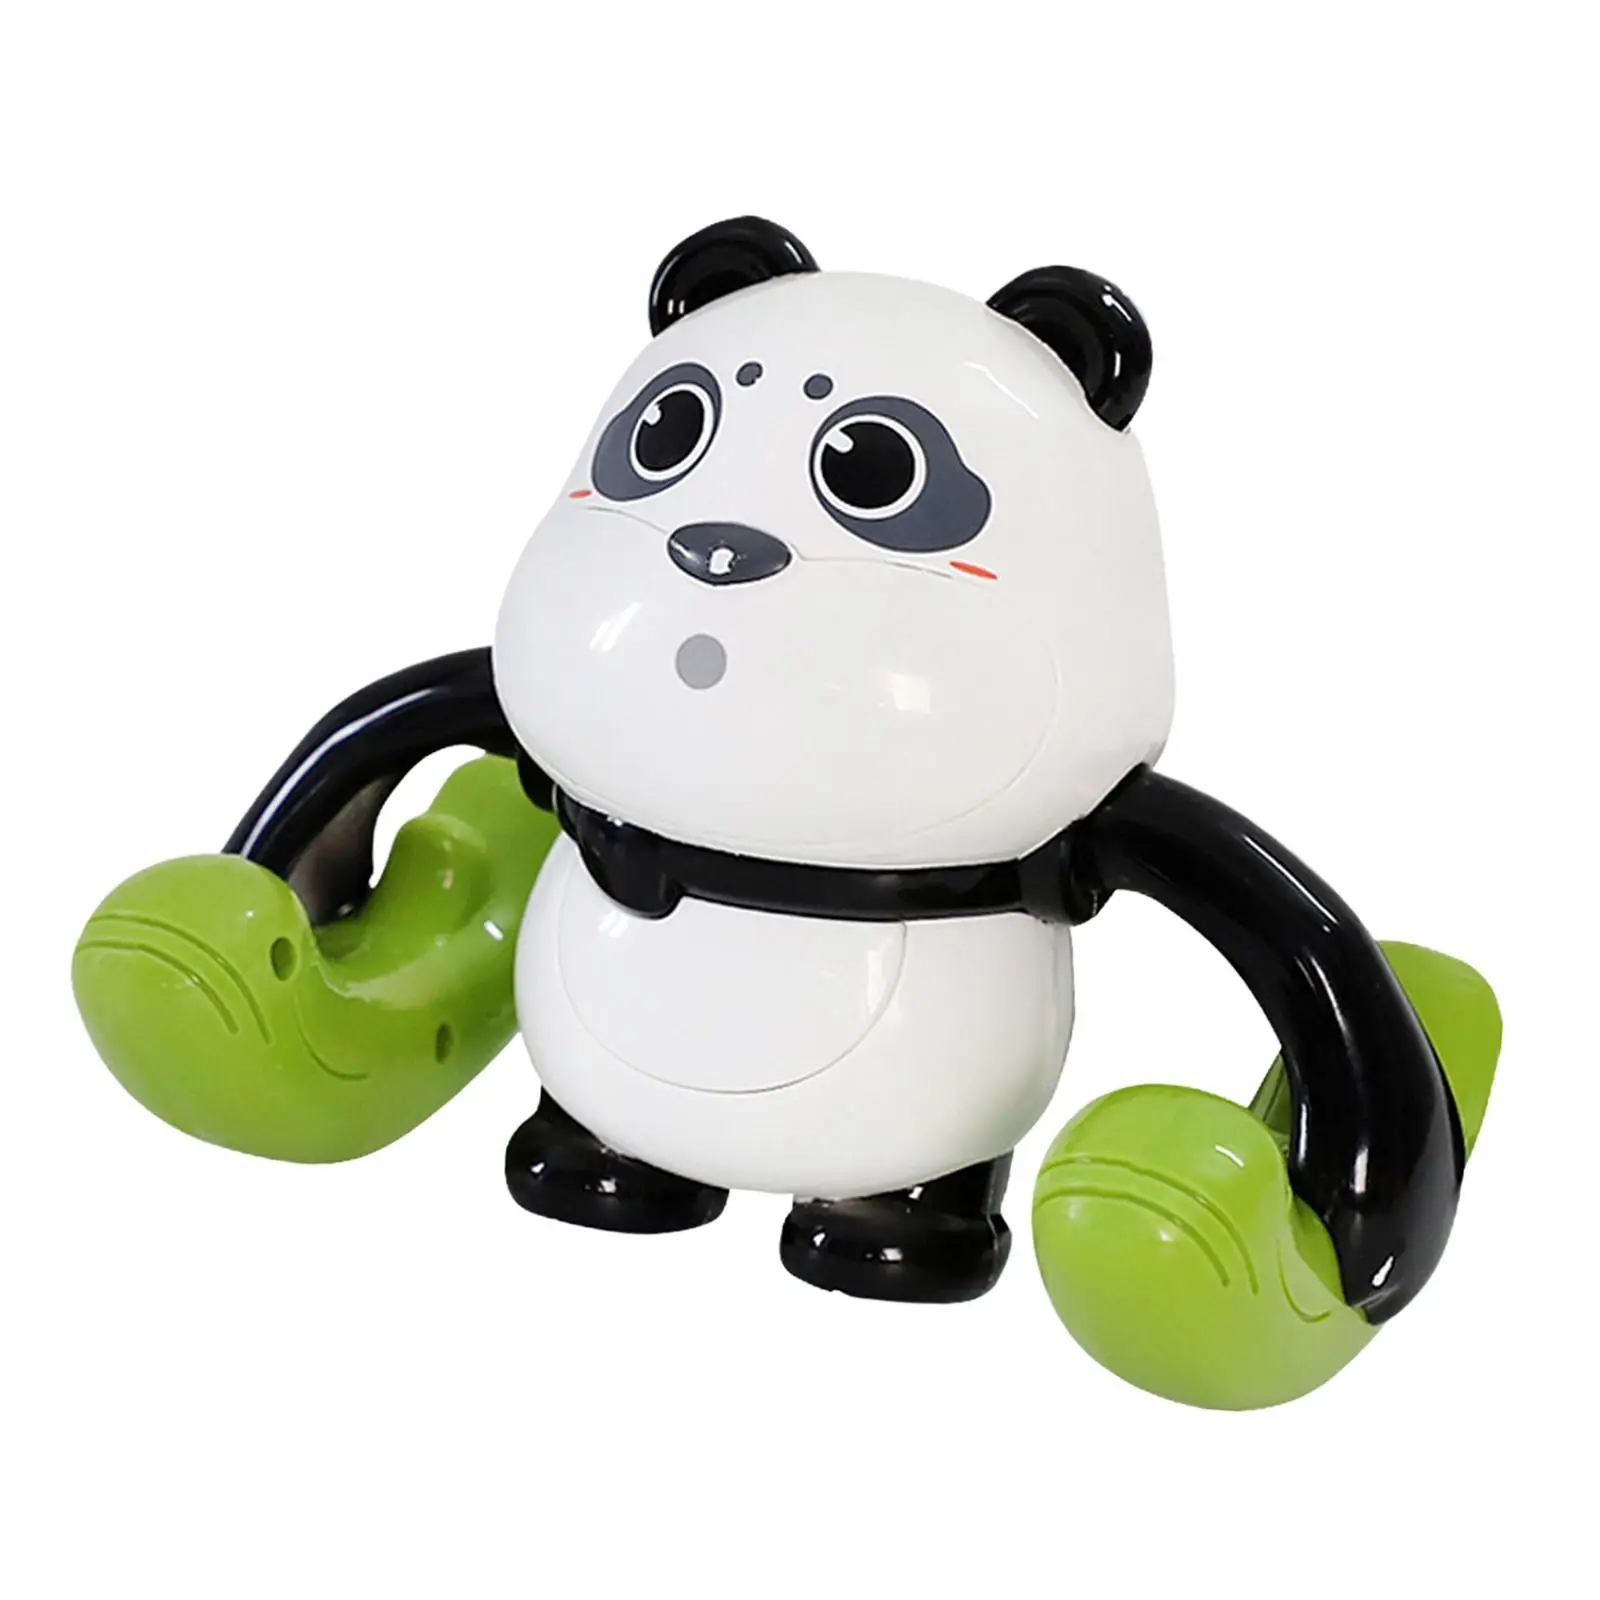 Electric Panda Toys Early Learning Sound Effect Interactive Crawling Panda Toy for Chasing Party Favor Gift Birthday Preschool